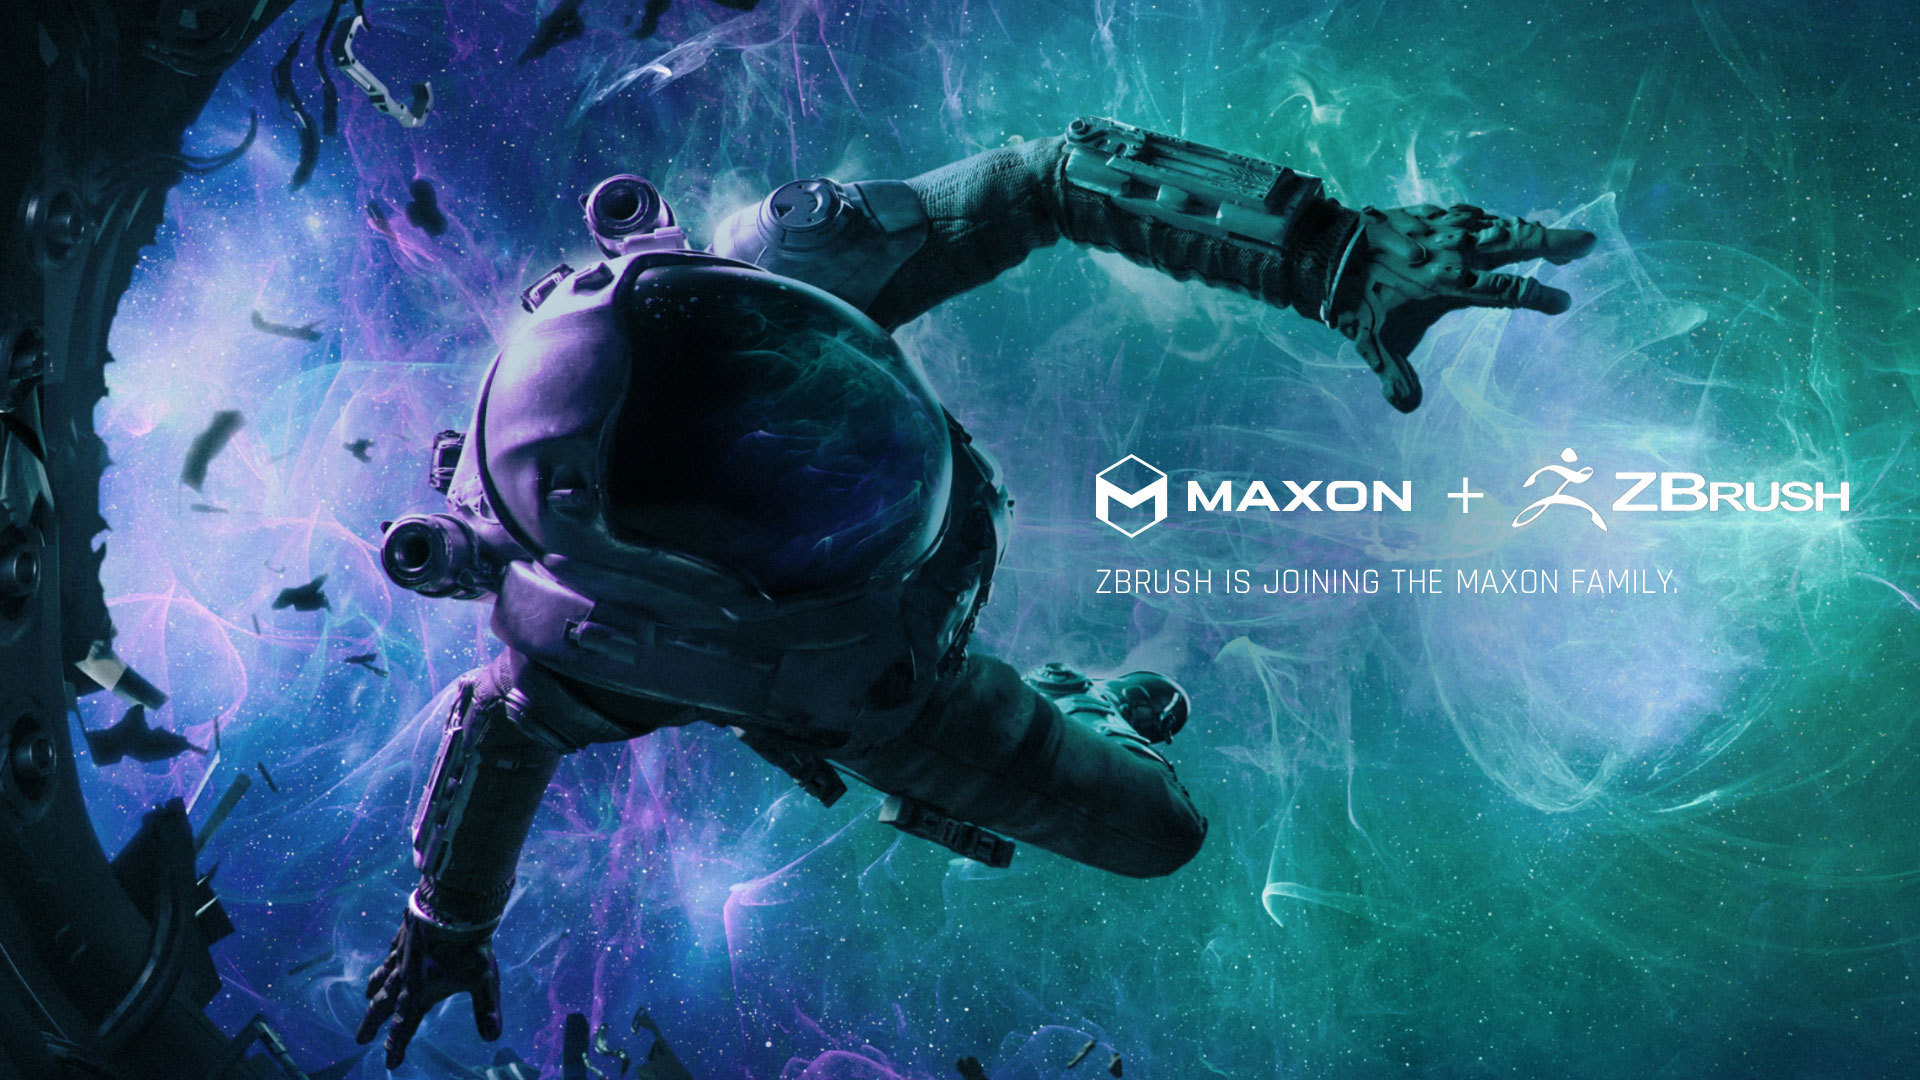 zbrush acquired by maxon